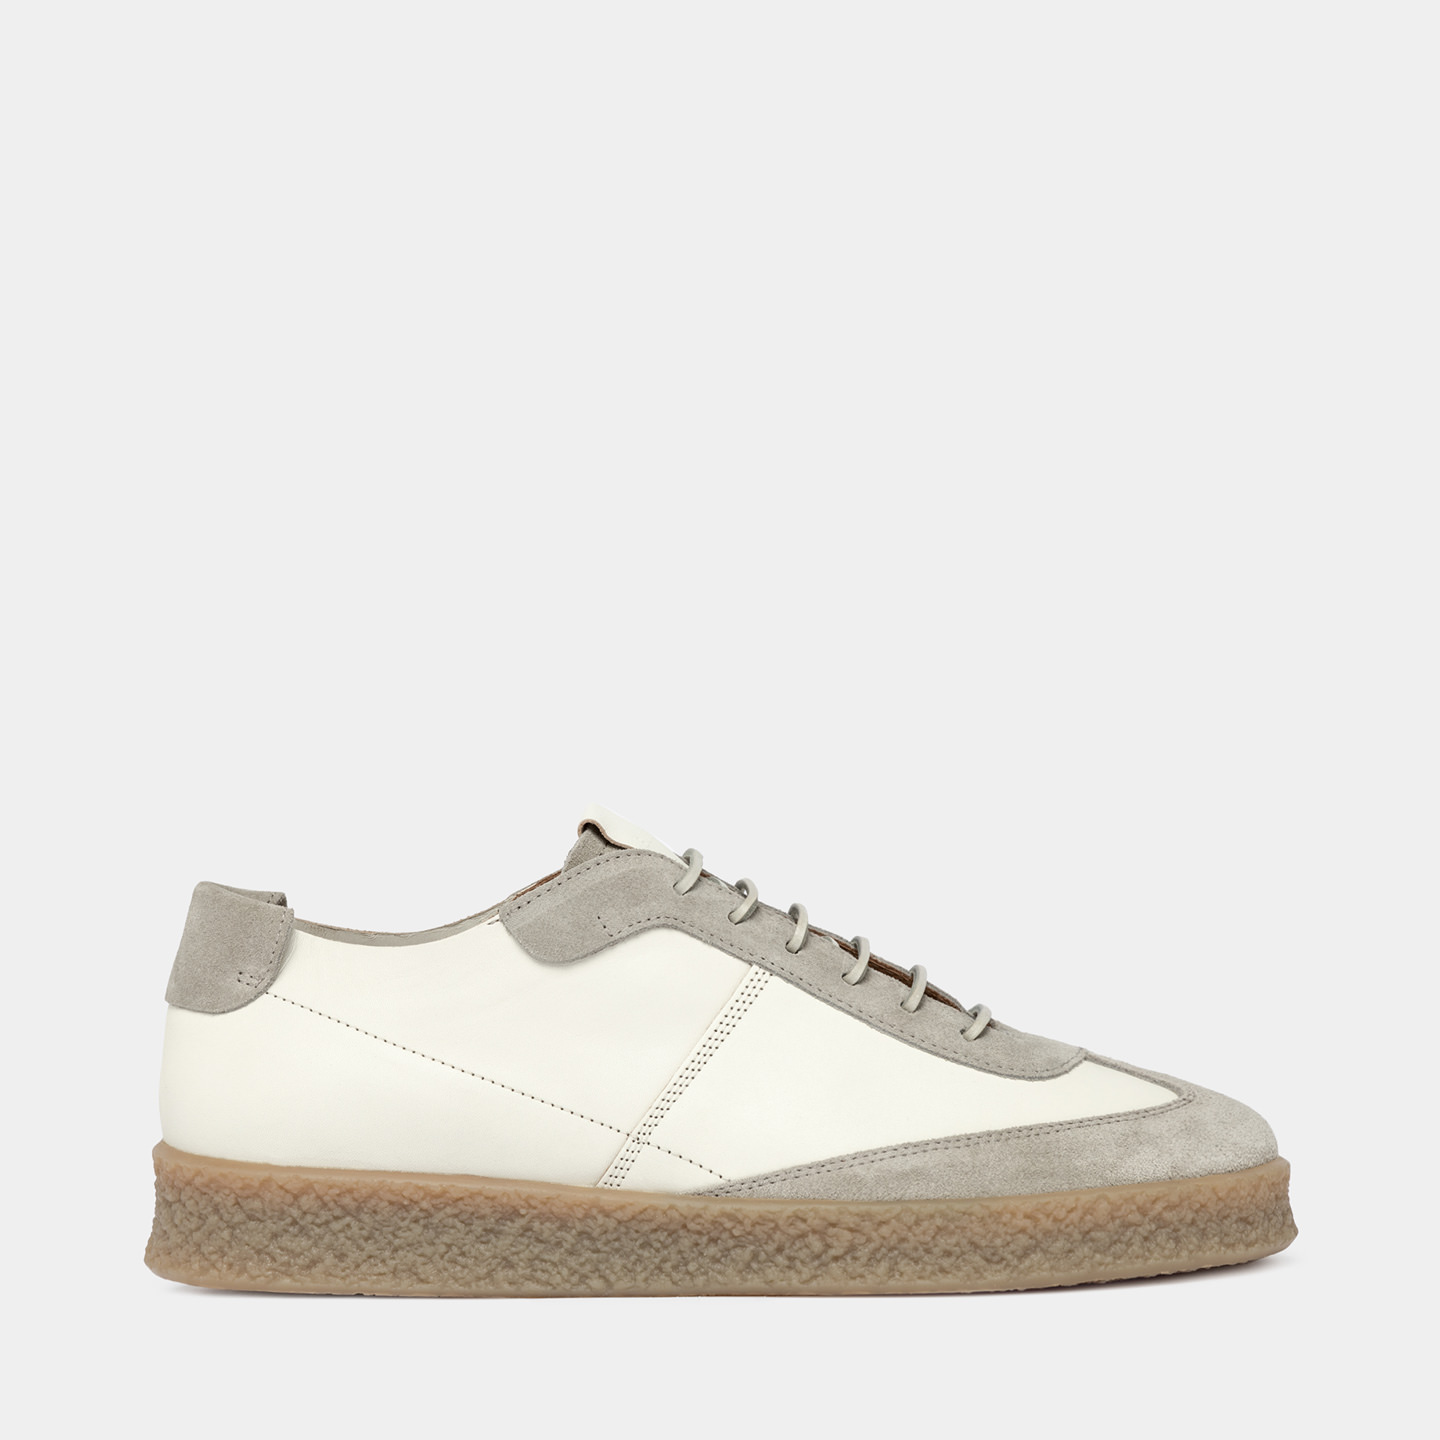 BUTTERO CRESPO SNEAKERS IN WHITE LEATHER B10500VARA-UG1/A-BIANCO